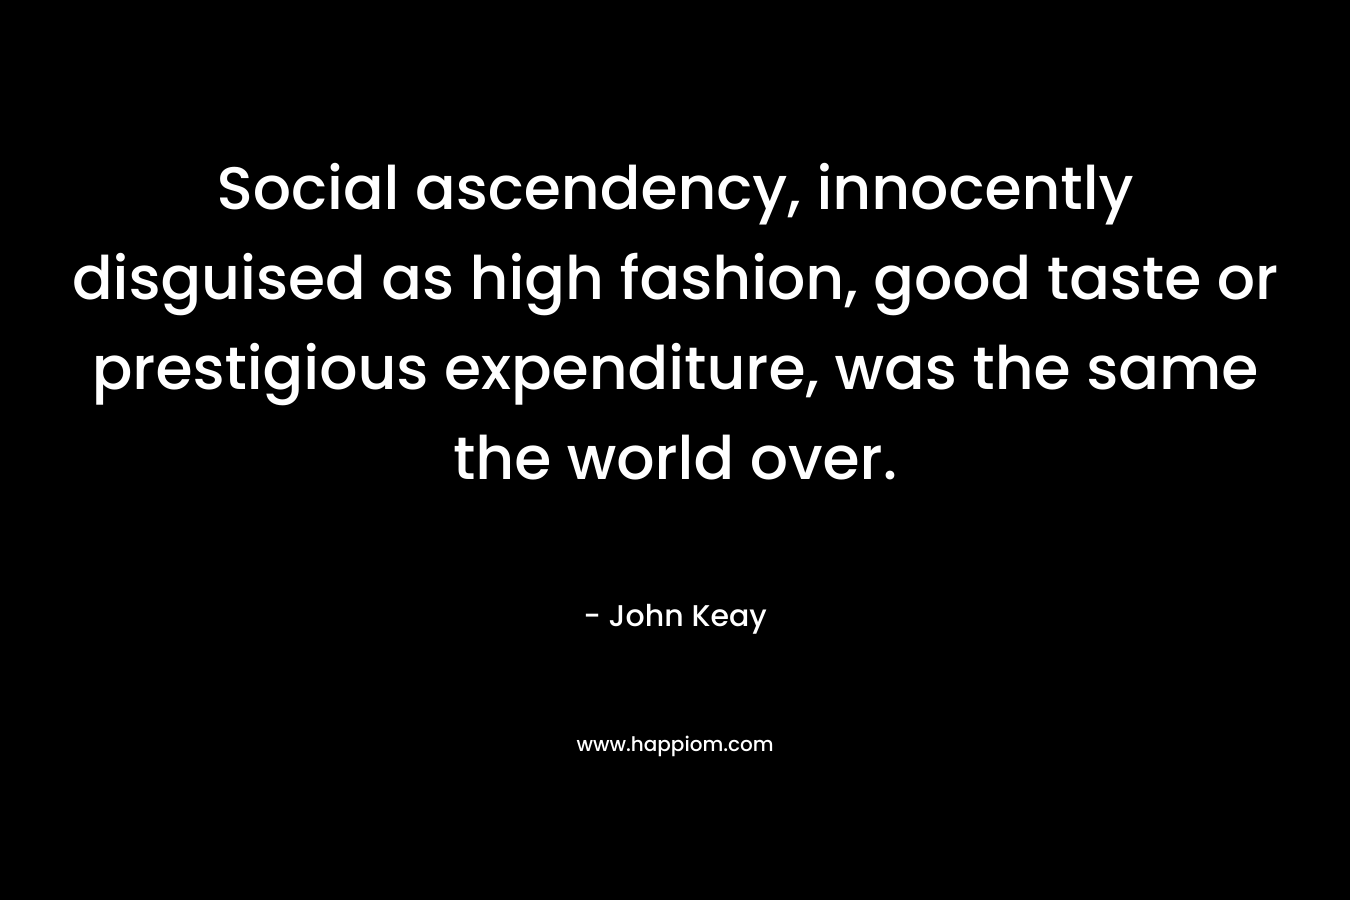 Social ascendency, innocently disguised as high fashion, good taste or prestigious expenditure, was the same the world over.